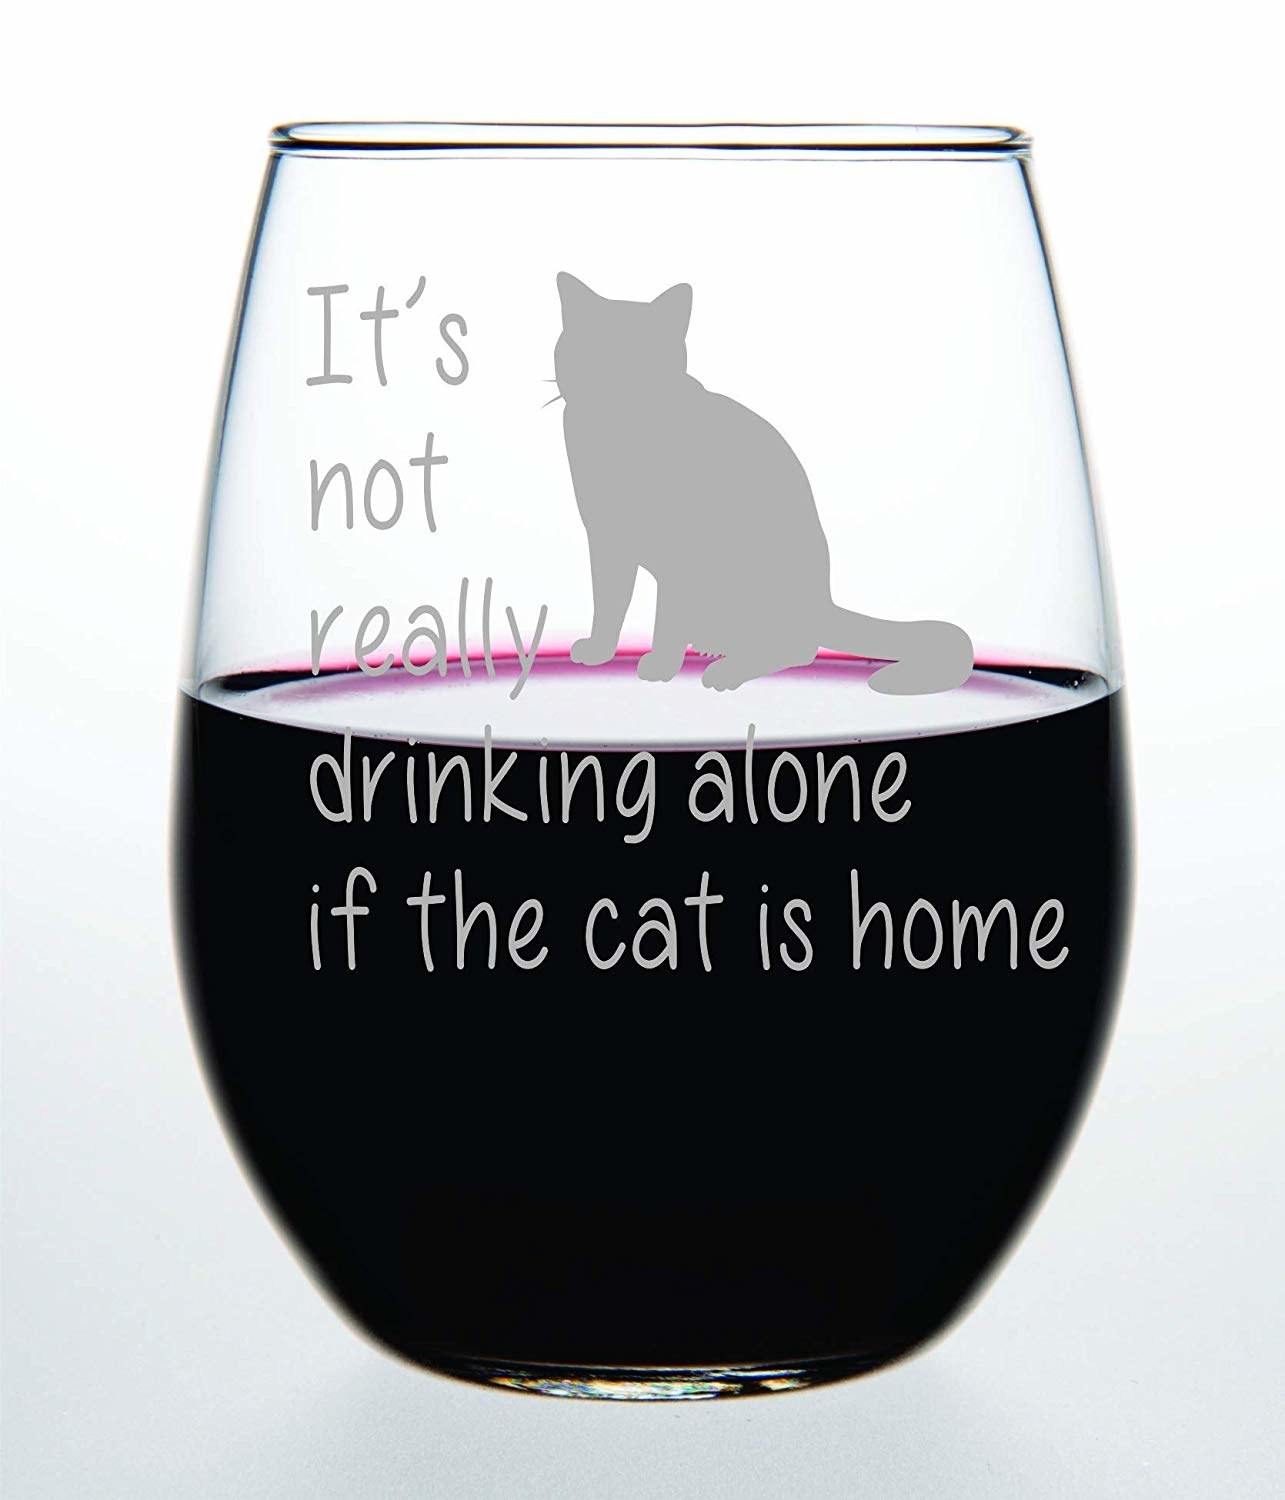 Birthday Wine Glass For House Cat Not So Much People Joke House Cat s I Love My Housecat